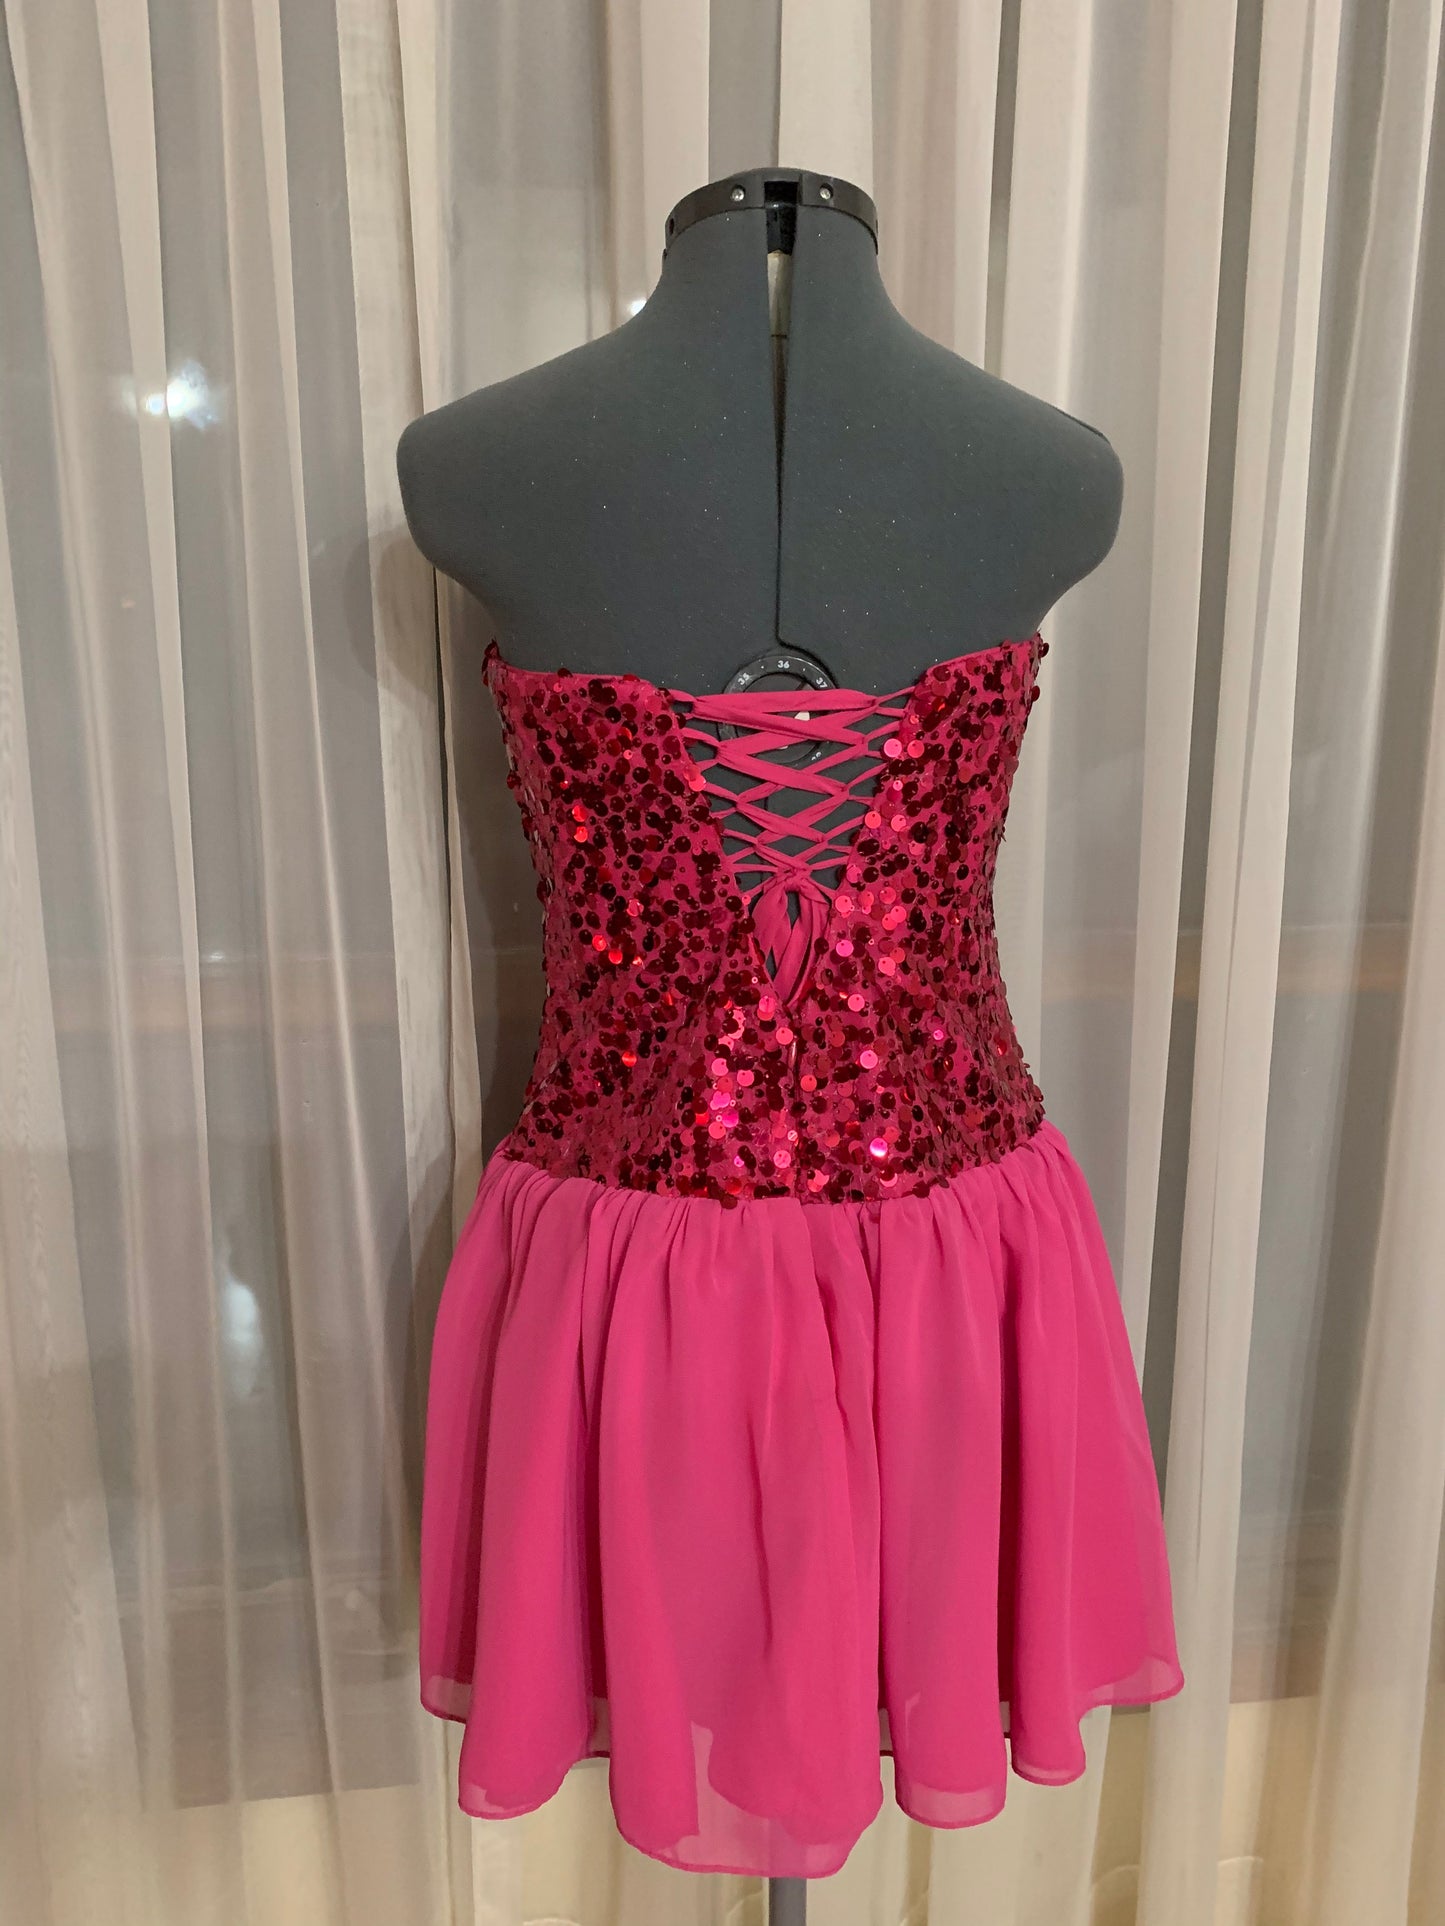 Short Dress Size Small Style 2827 - MISS LESTER'S 